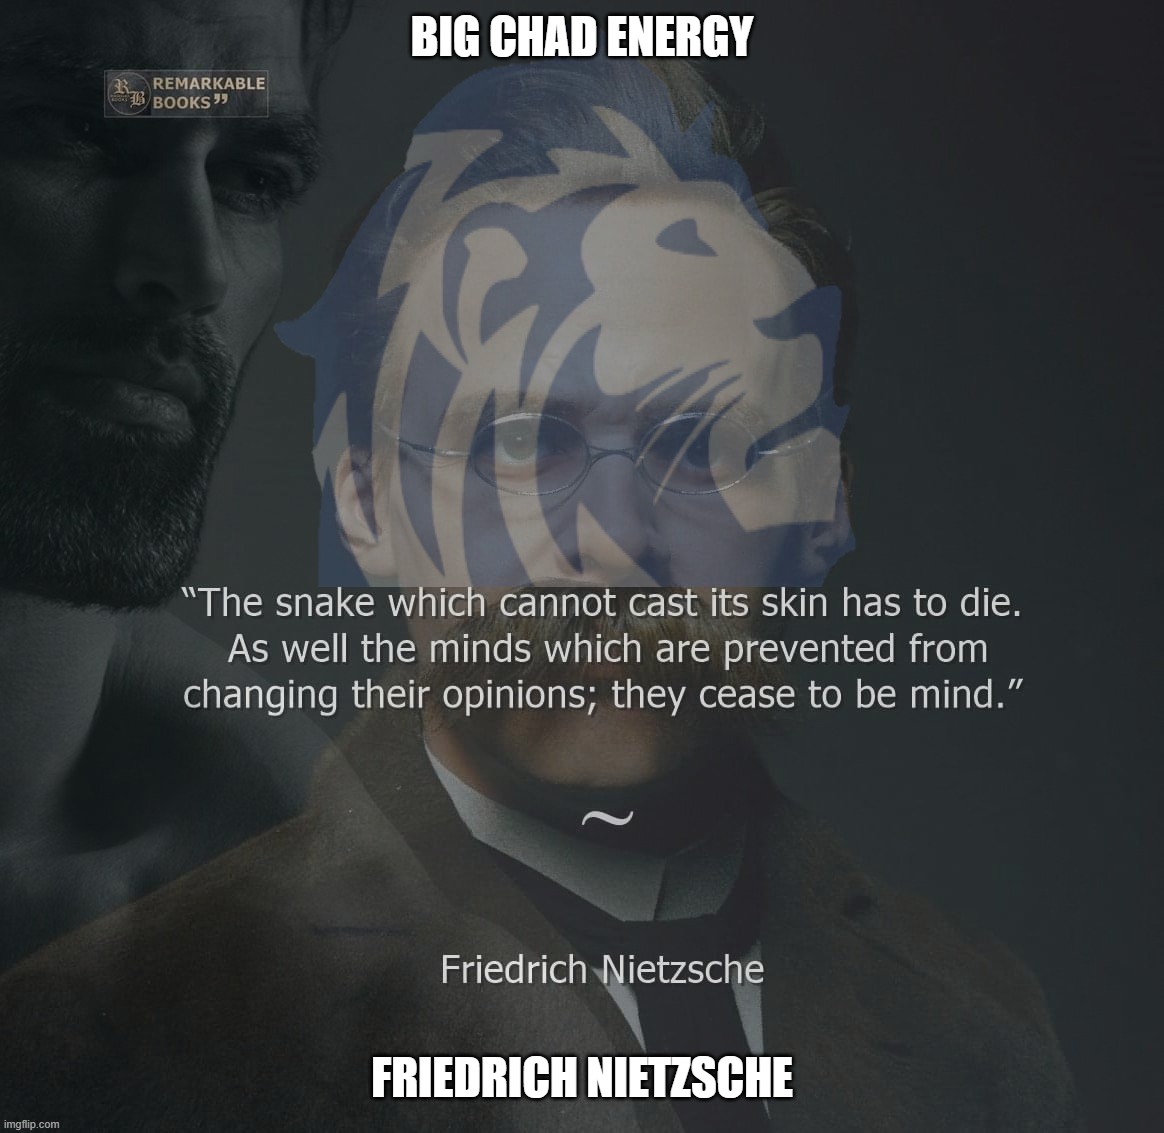 Defender of Western Civilization lol! | BIG CHAD ENERGY; FRIEDRICH NIETZSCHE | image tagged in nietzsche,friedrich nietzsche,philosopher,philosophy,maga,conservative party | made w/ Imgflip meme maker